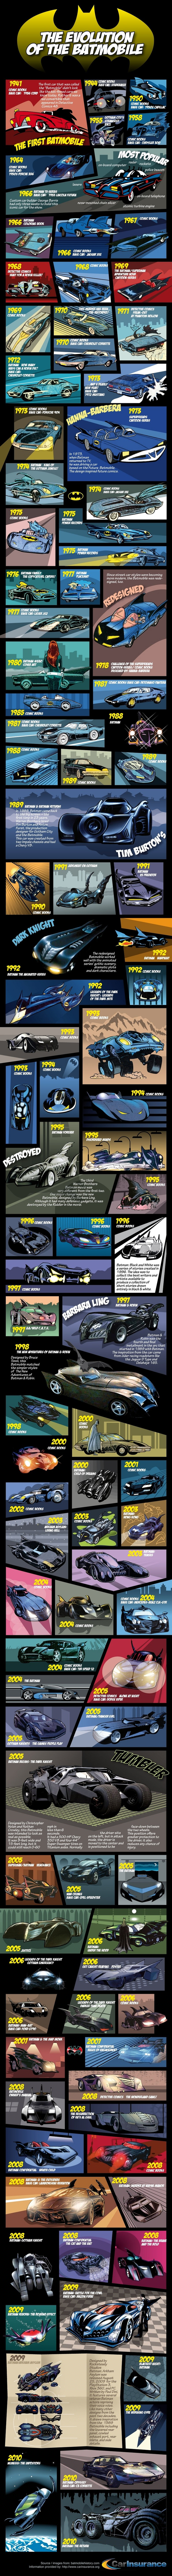 History of Batmobile. Pure awesome.. Okay, how about this: Batman driving KIt from Nightrider...